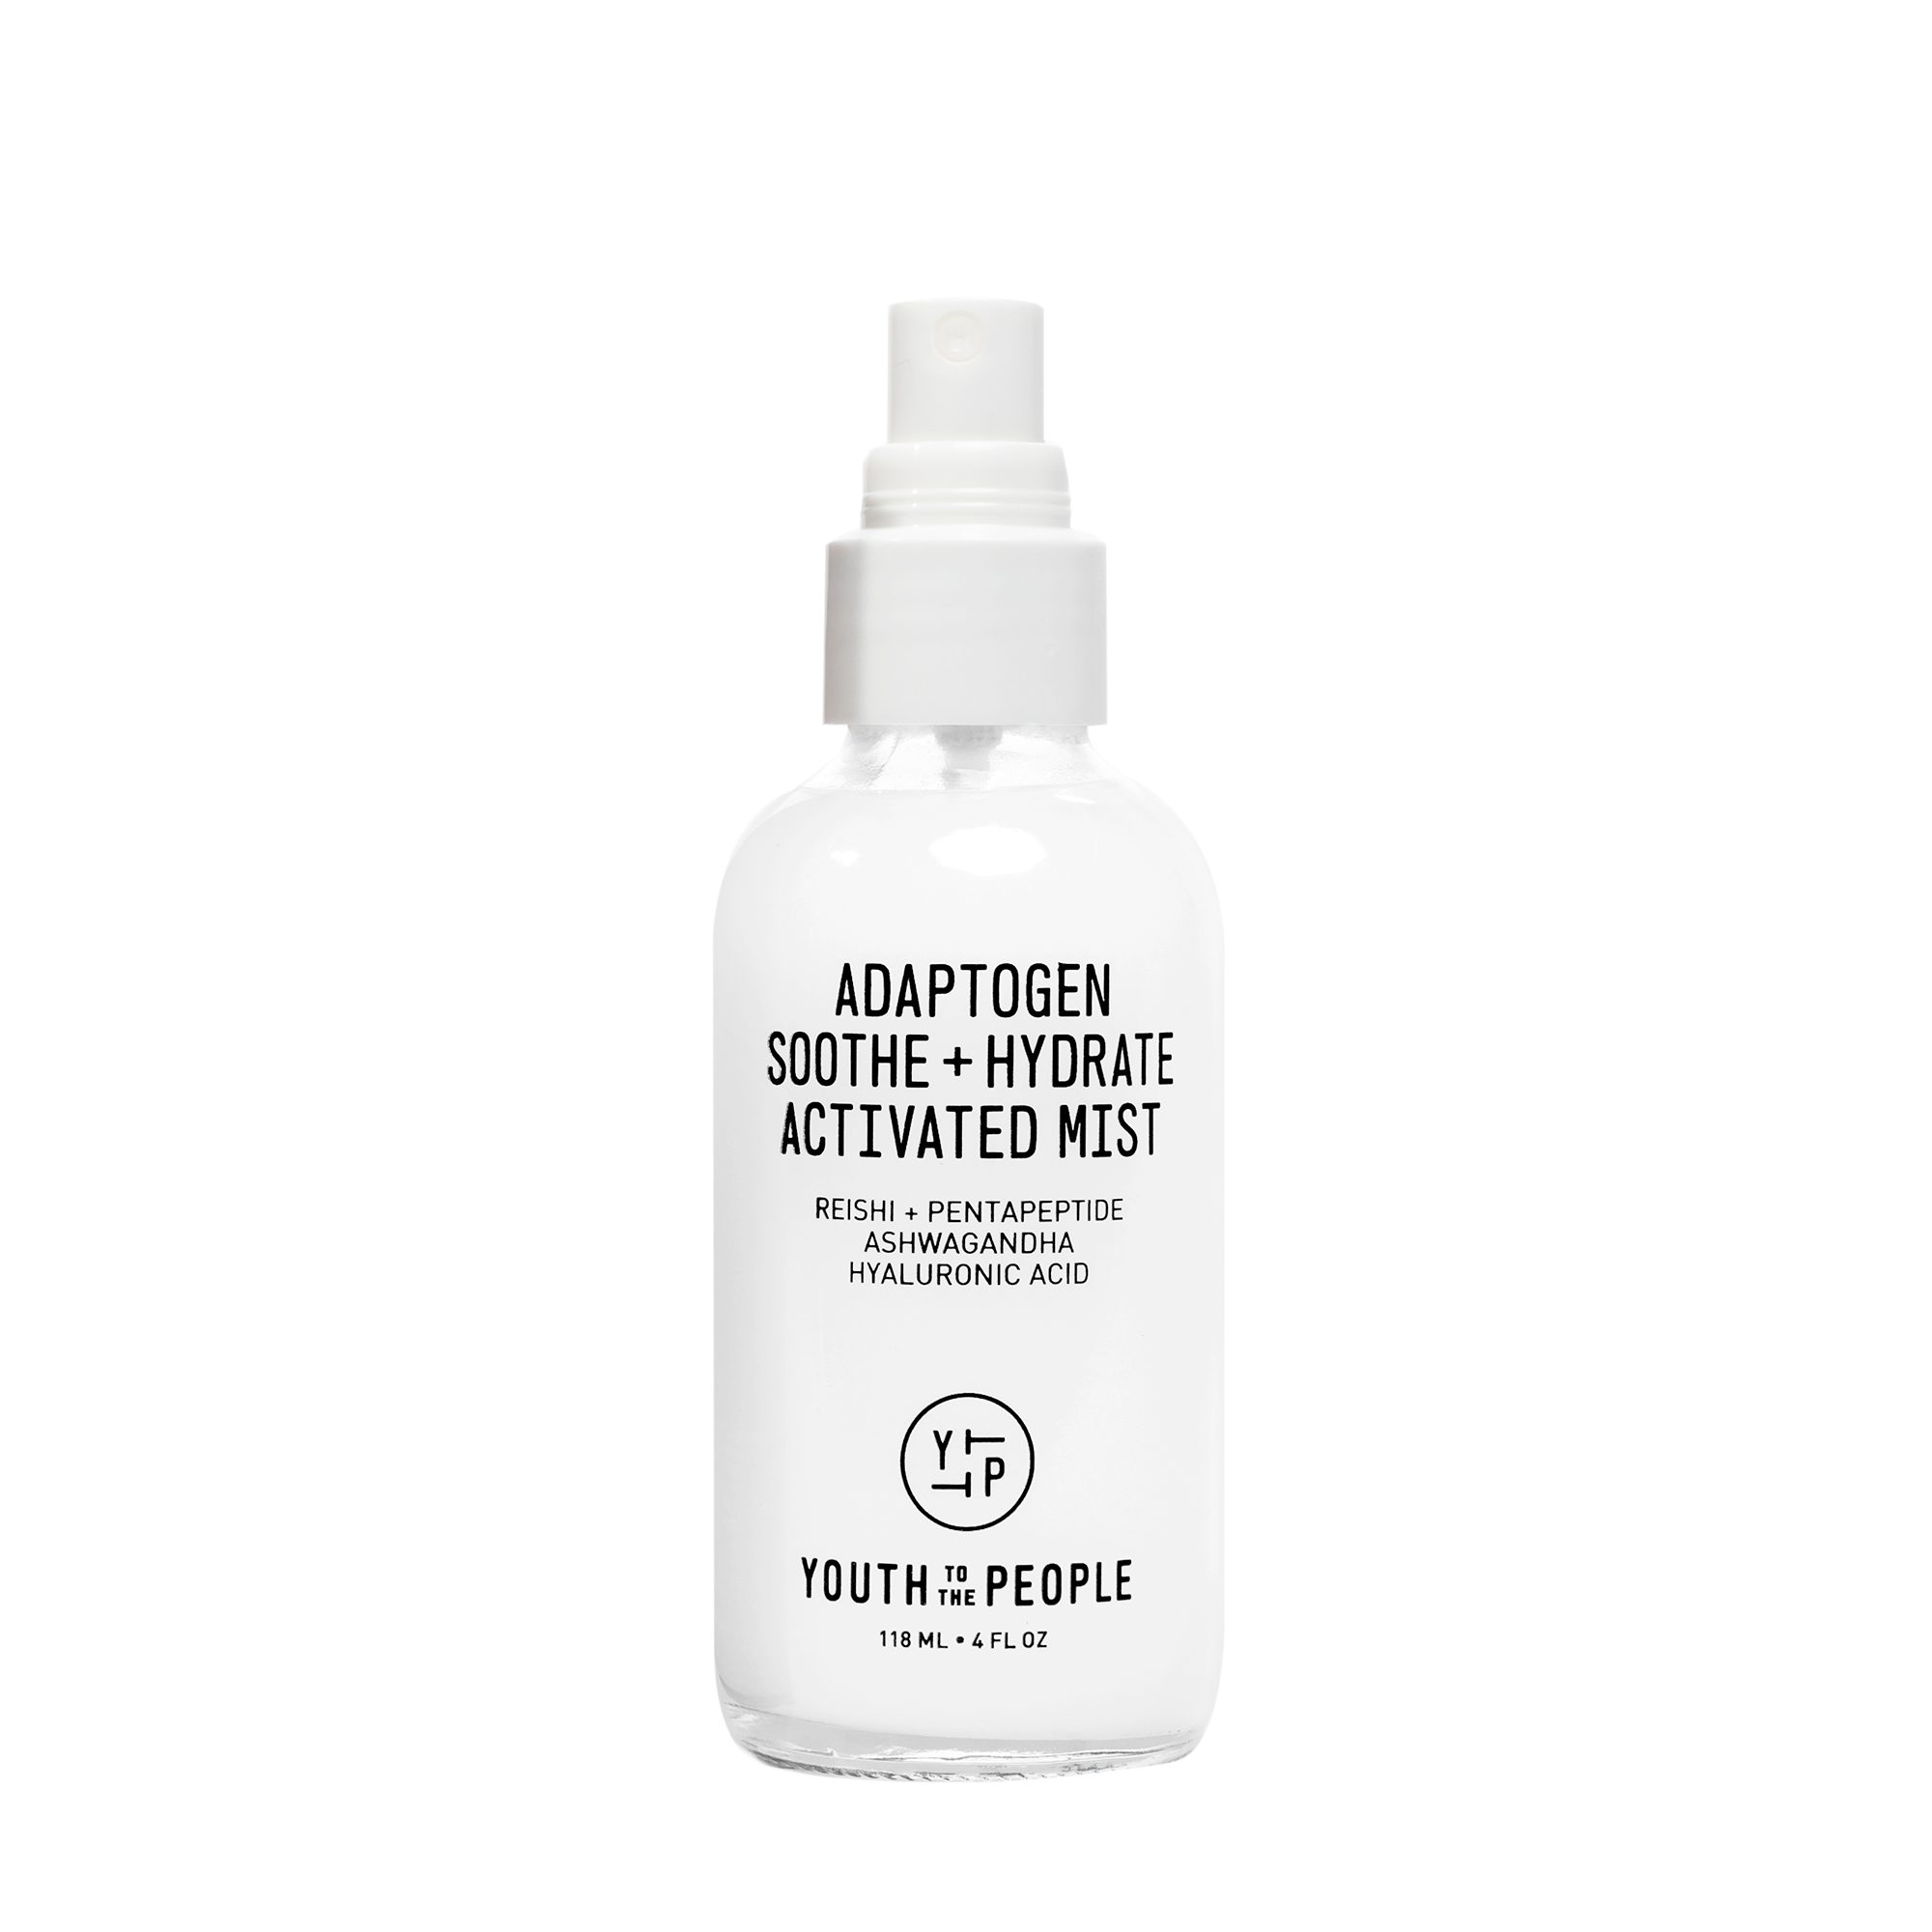 youth to the people activated mist product